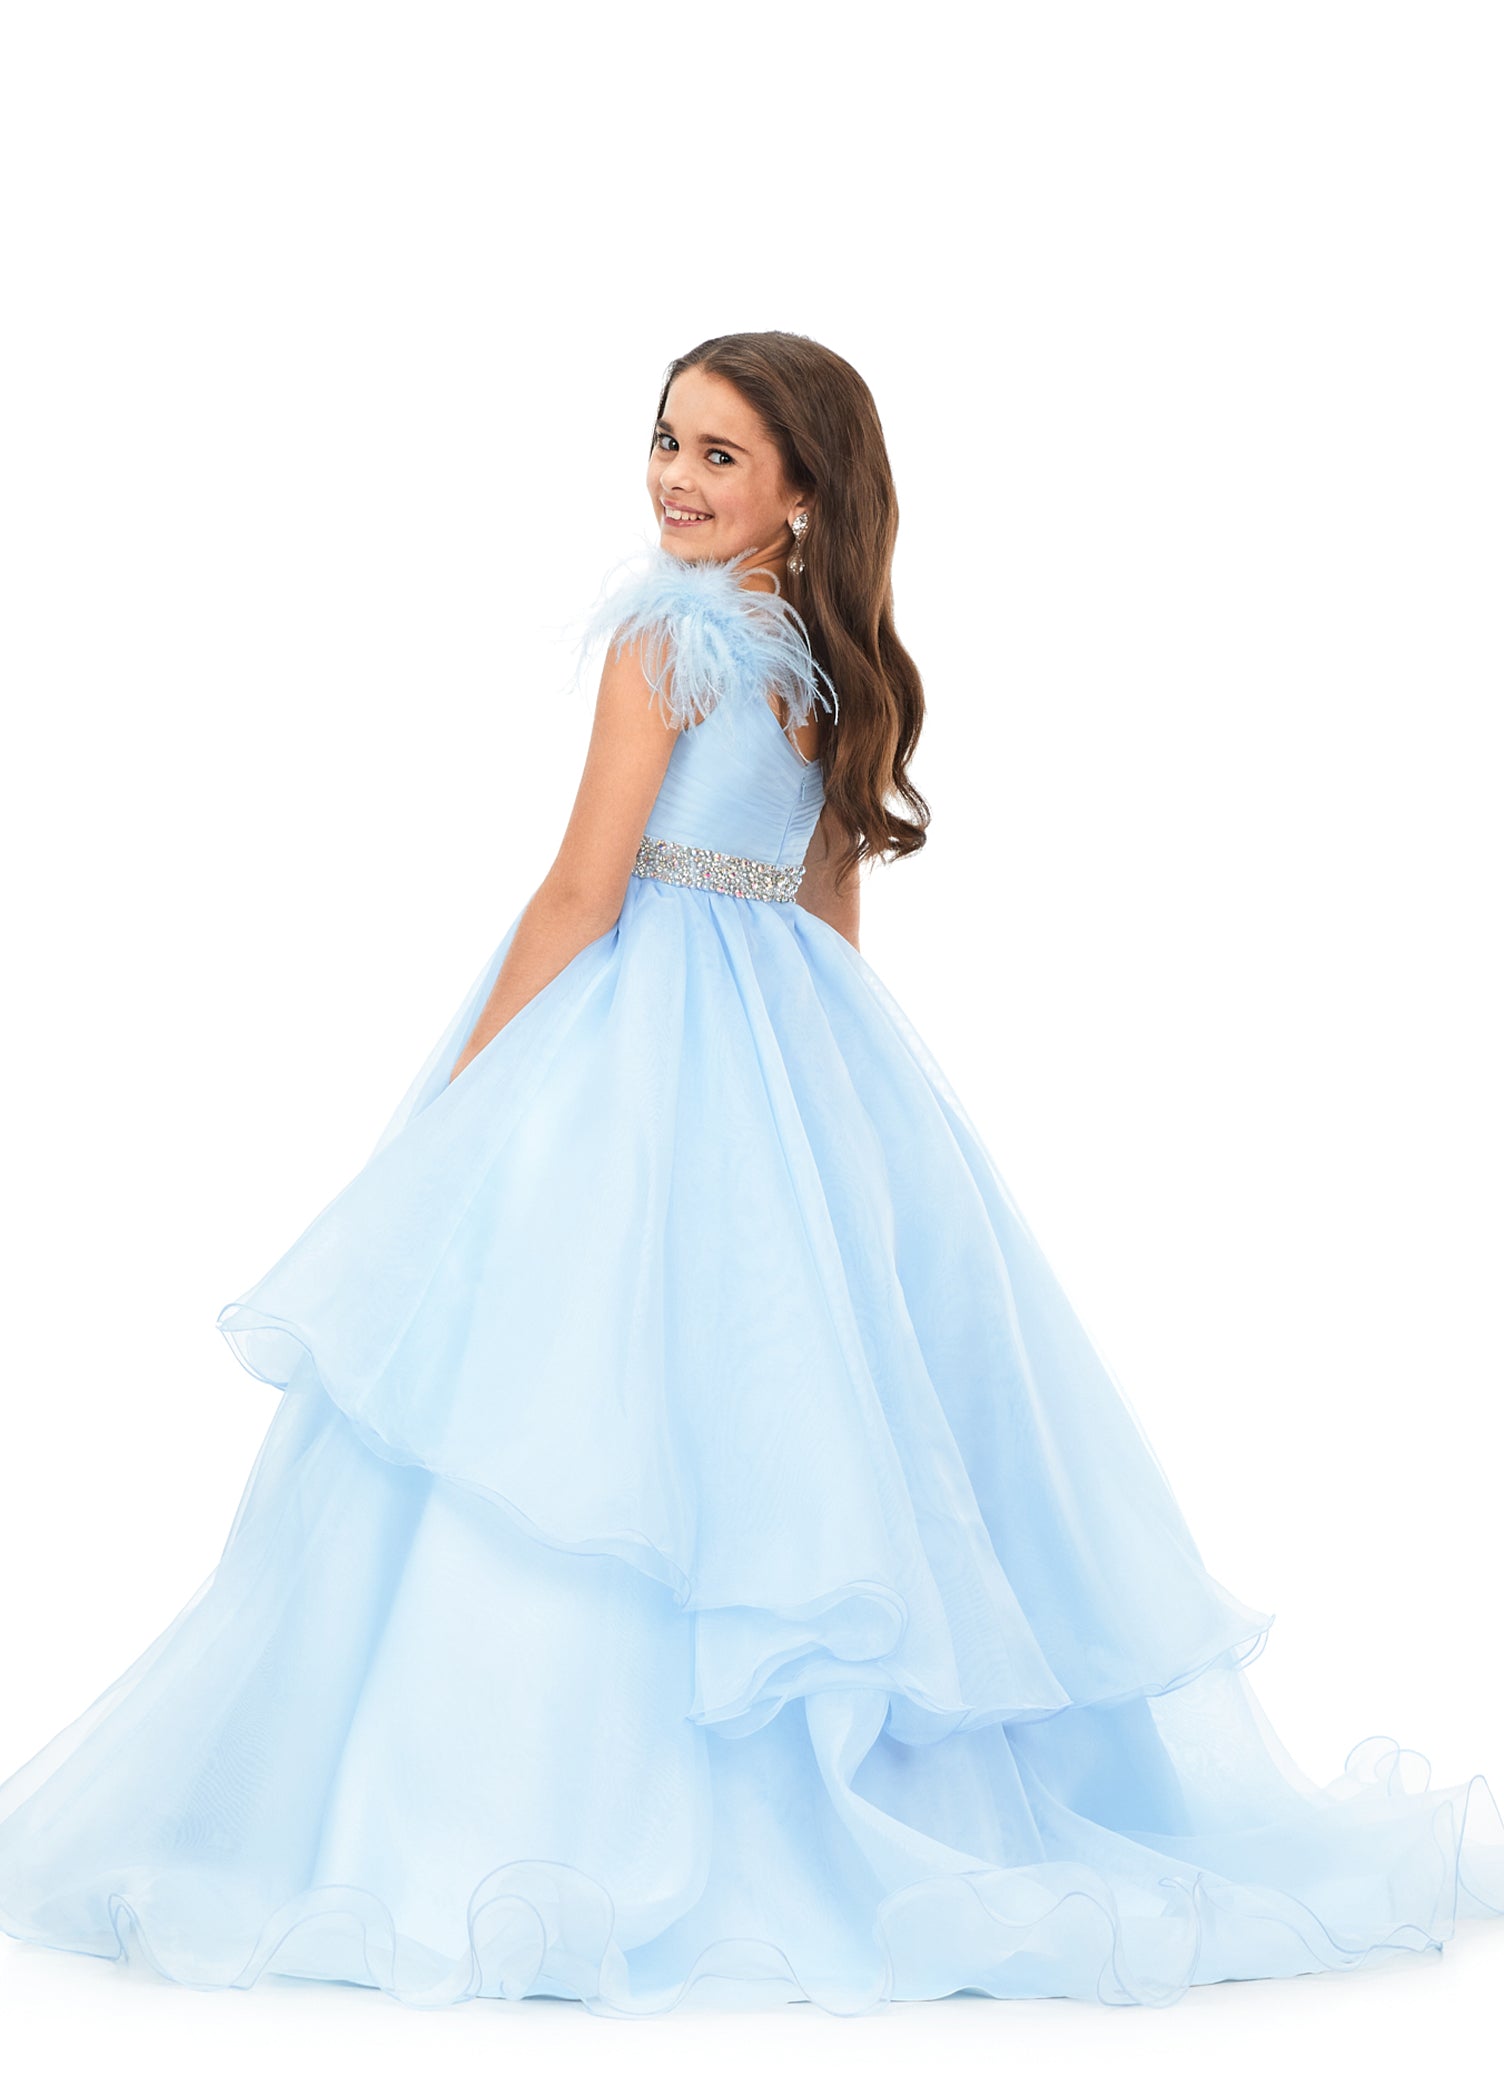 Ashley Lauren Kids 8184 Girls Pageant Dress Ball Gown with Feather Details